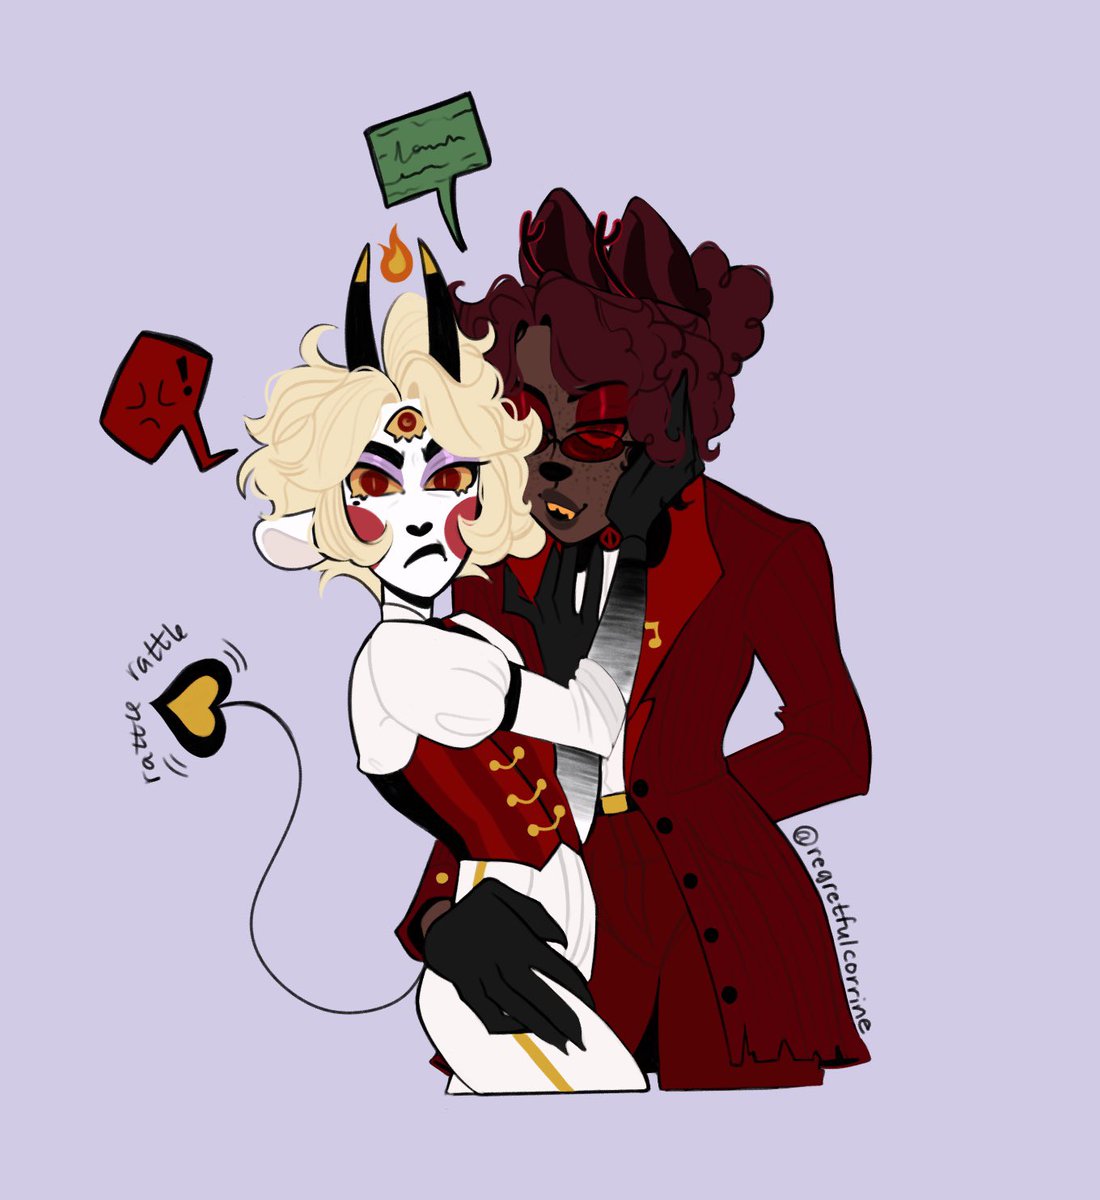 Better watch urself. Alastor is gonna snitch on u to his attack chihuahua 🐶

#radioapple #HazbinHotel #HazbinHotelAlastor #HazbinHotelLucifer